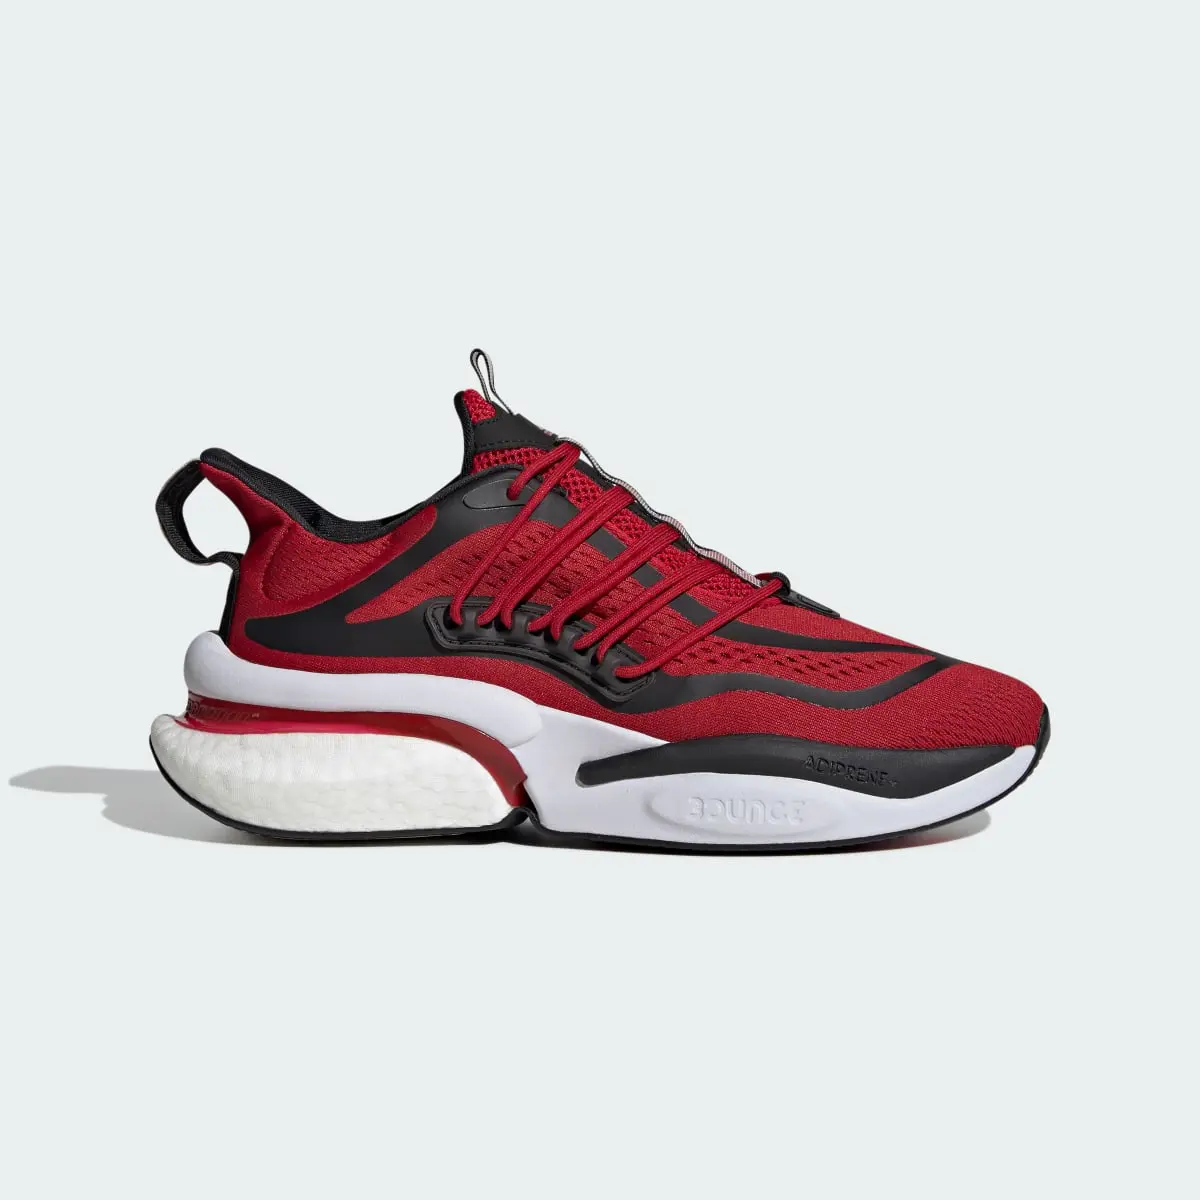 Adidas Louisville Alphaboost V1 Shoes. 2